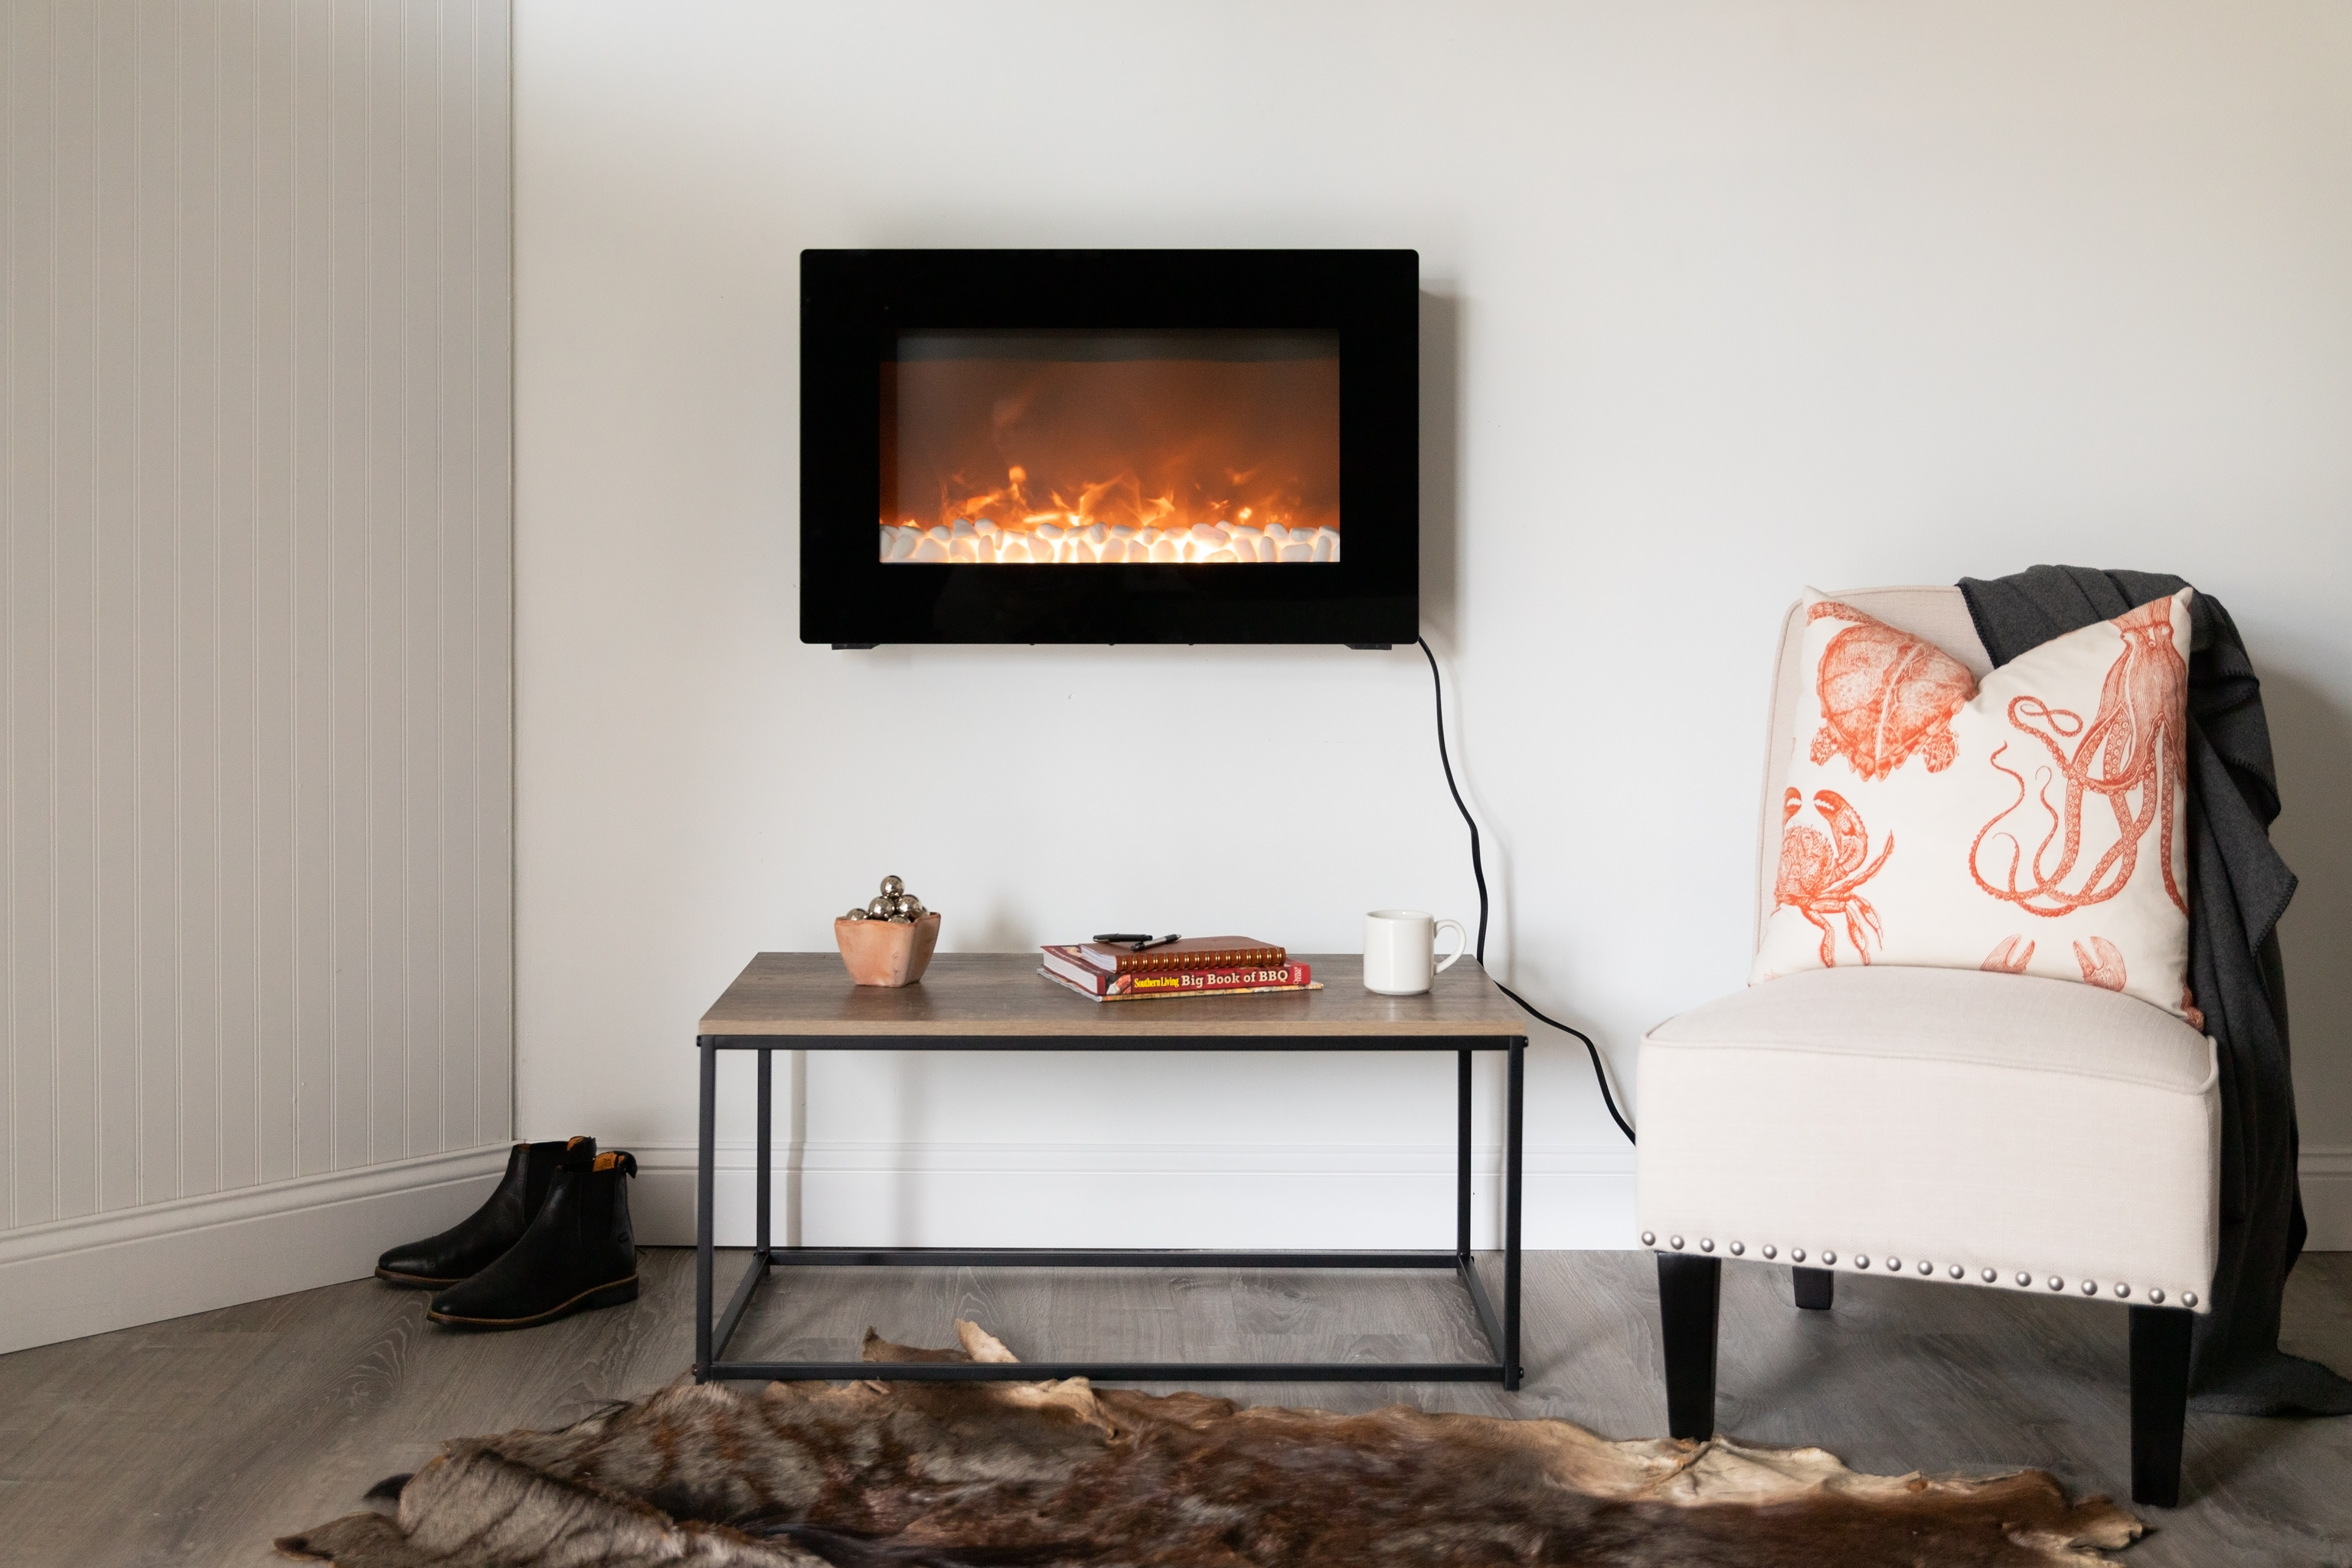 Black Wall Mounted Electric Fireplace | Well Traveled Living